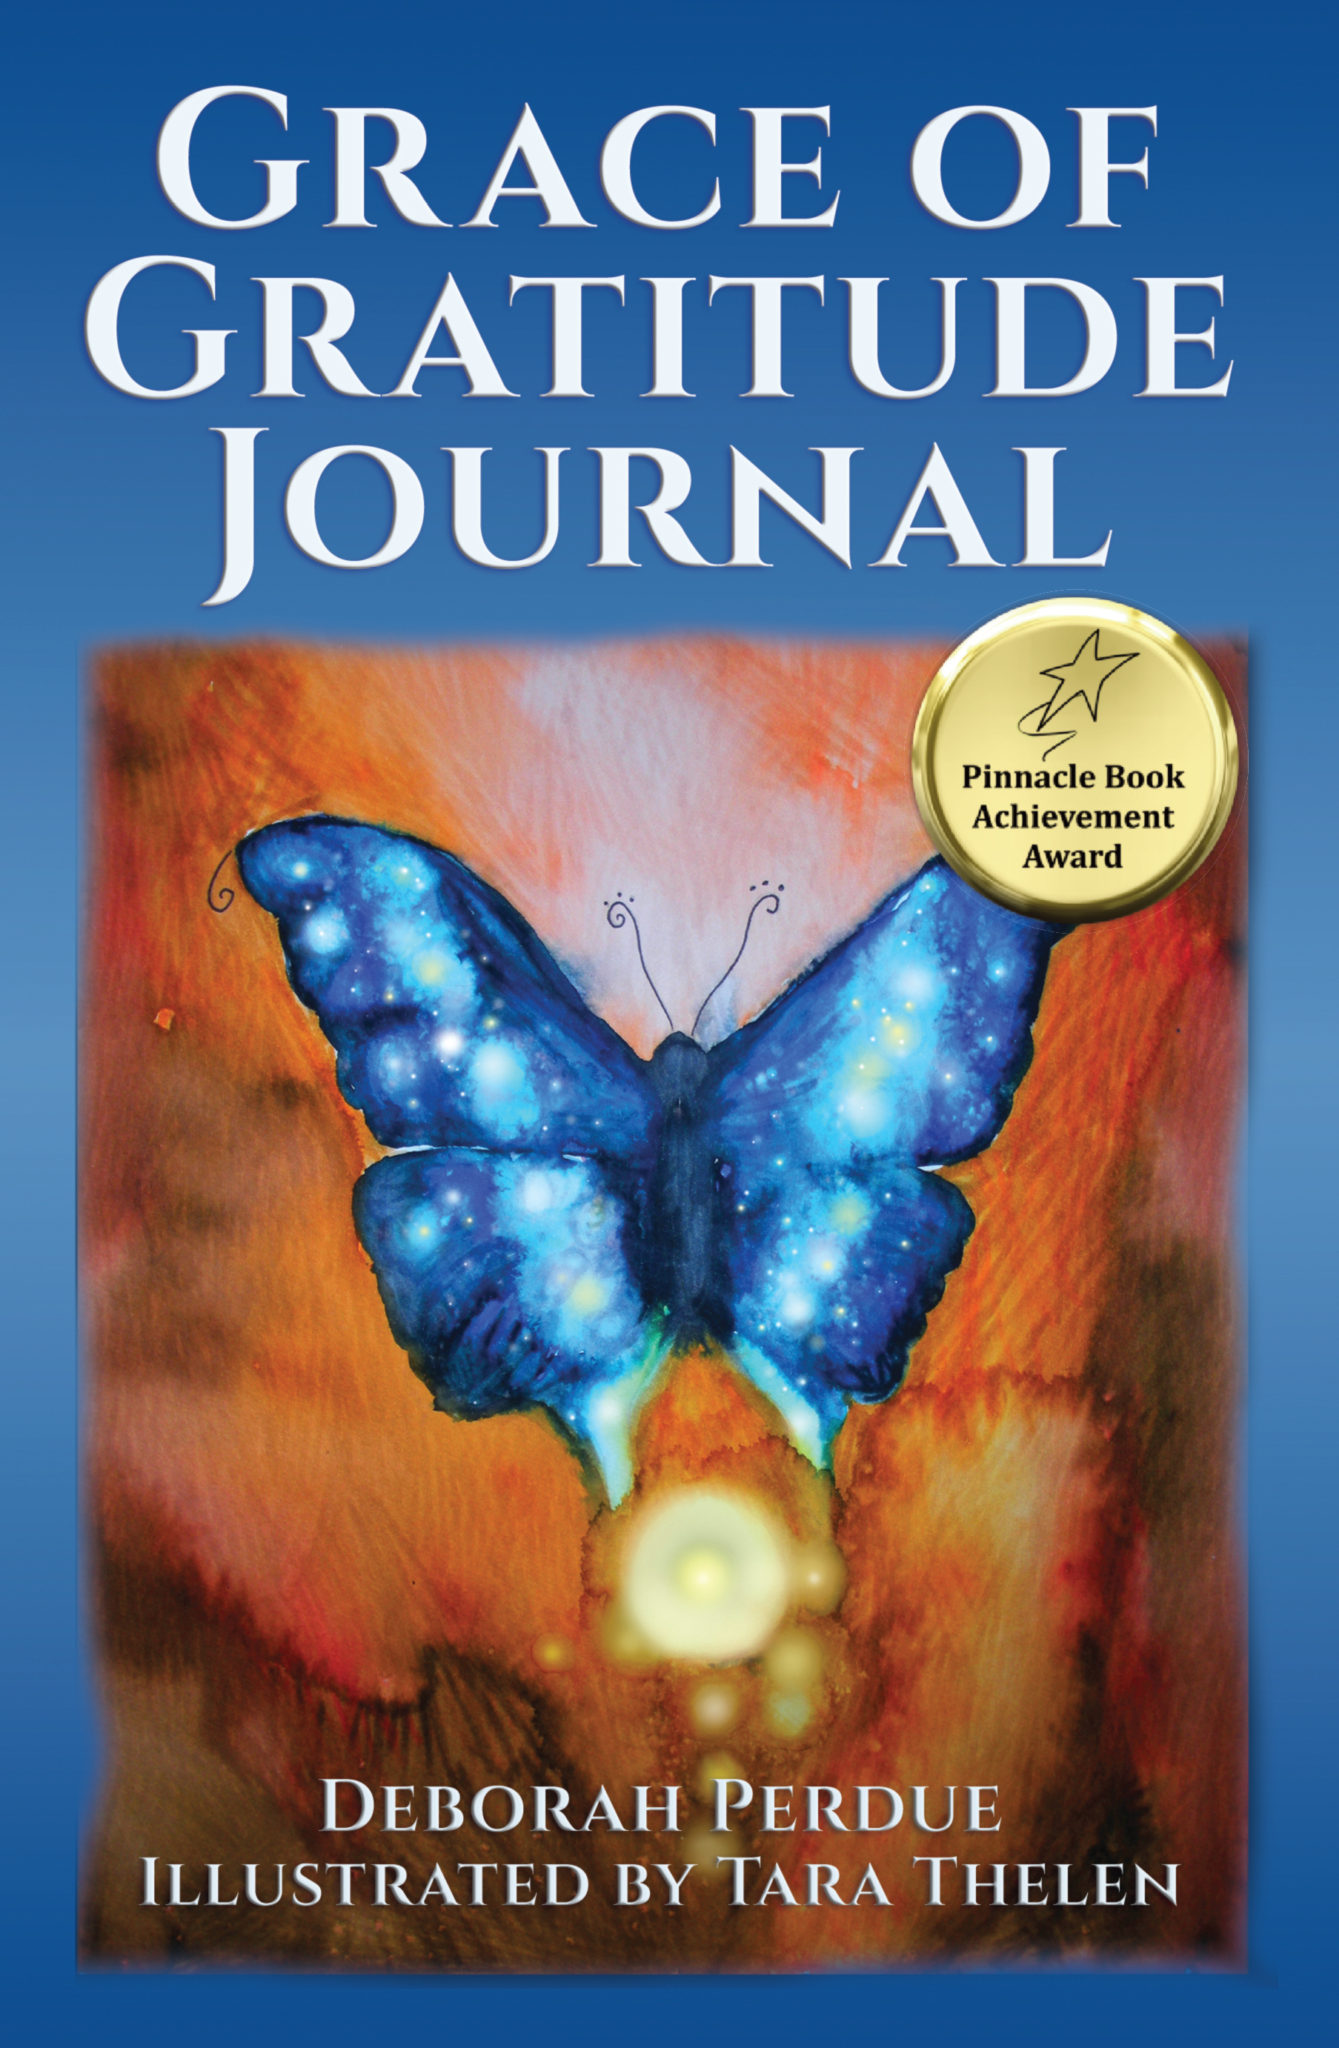 Grace of Gratitude Journal: Experience Greater Happiness, Blesssings and Deep Spiritual Transformation Through Journaling Daily Gratitudes (An Inspirational Self-Help Guide) by Deborah Perdue